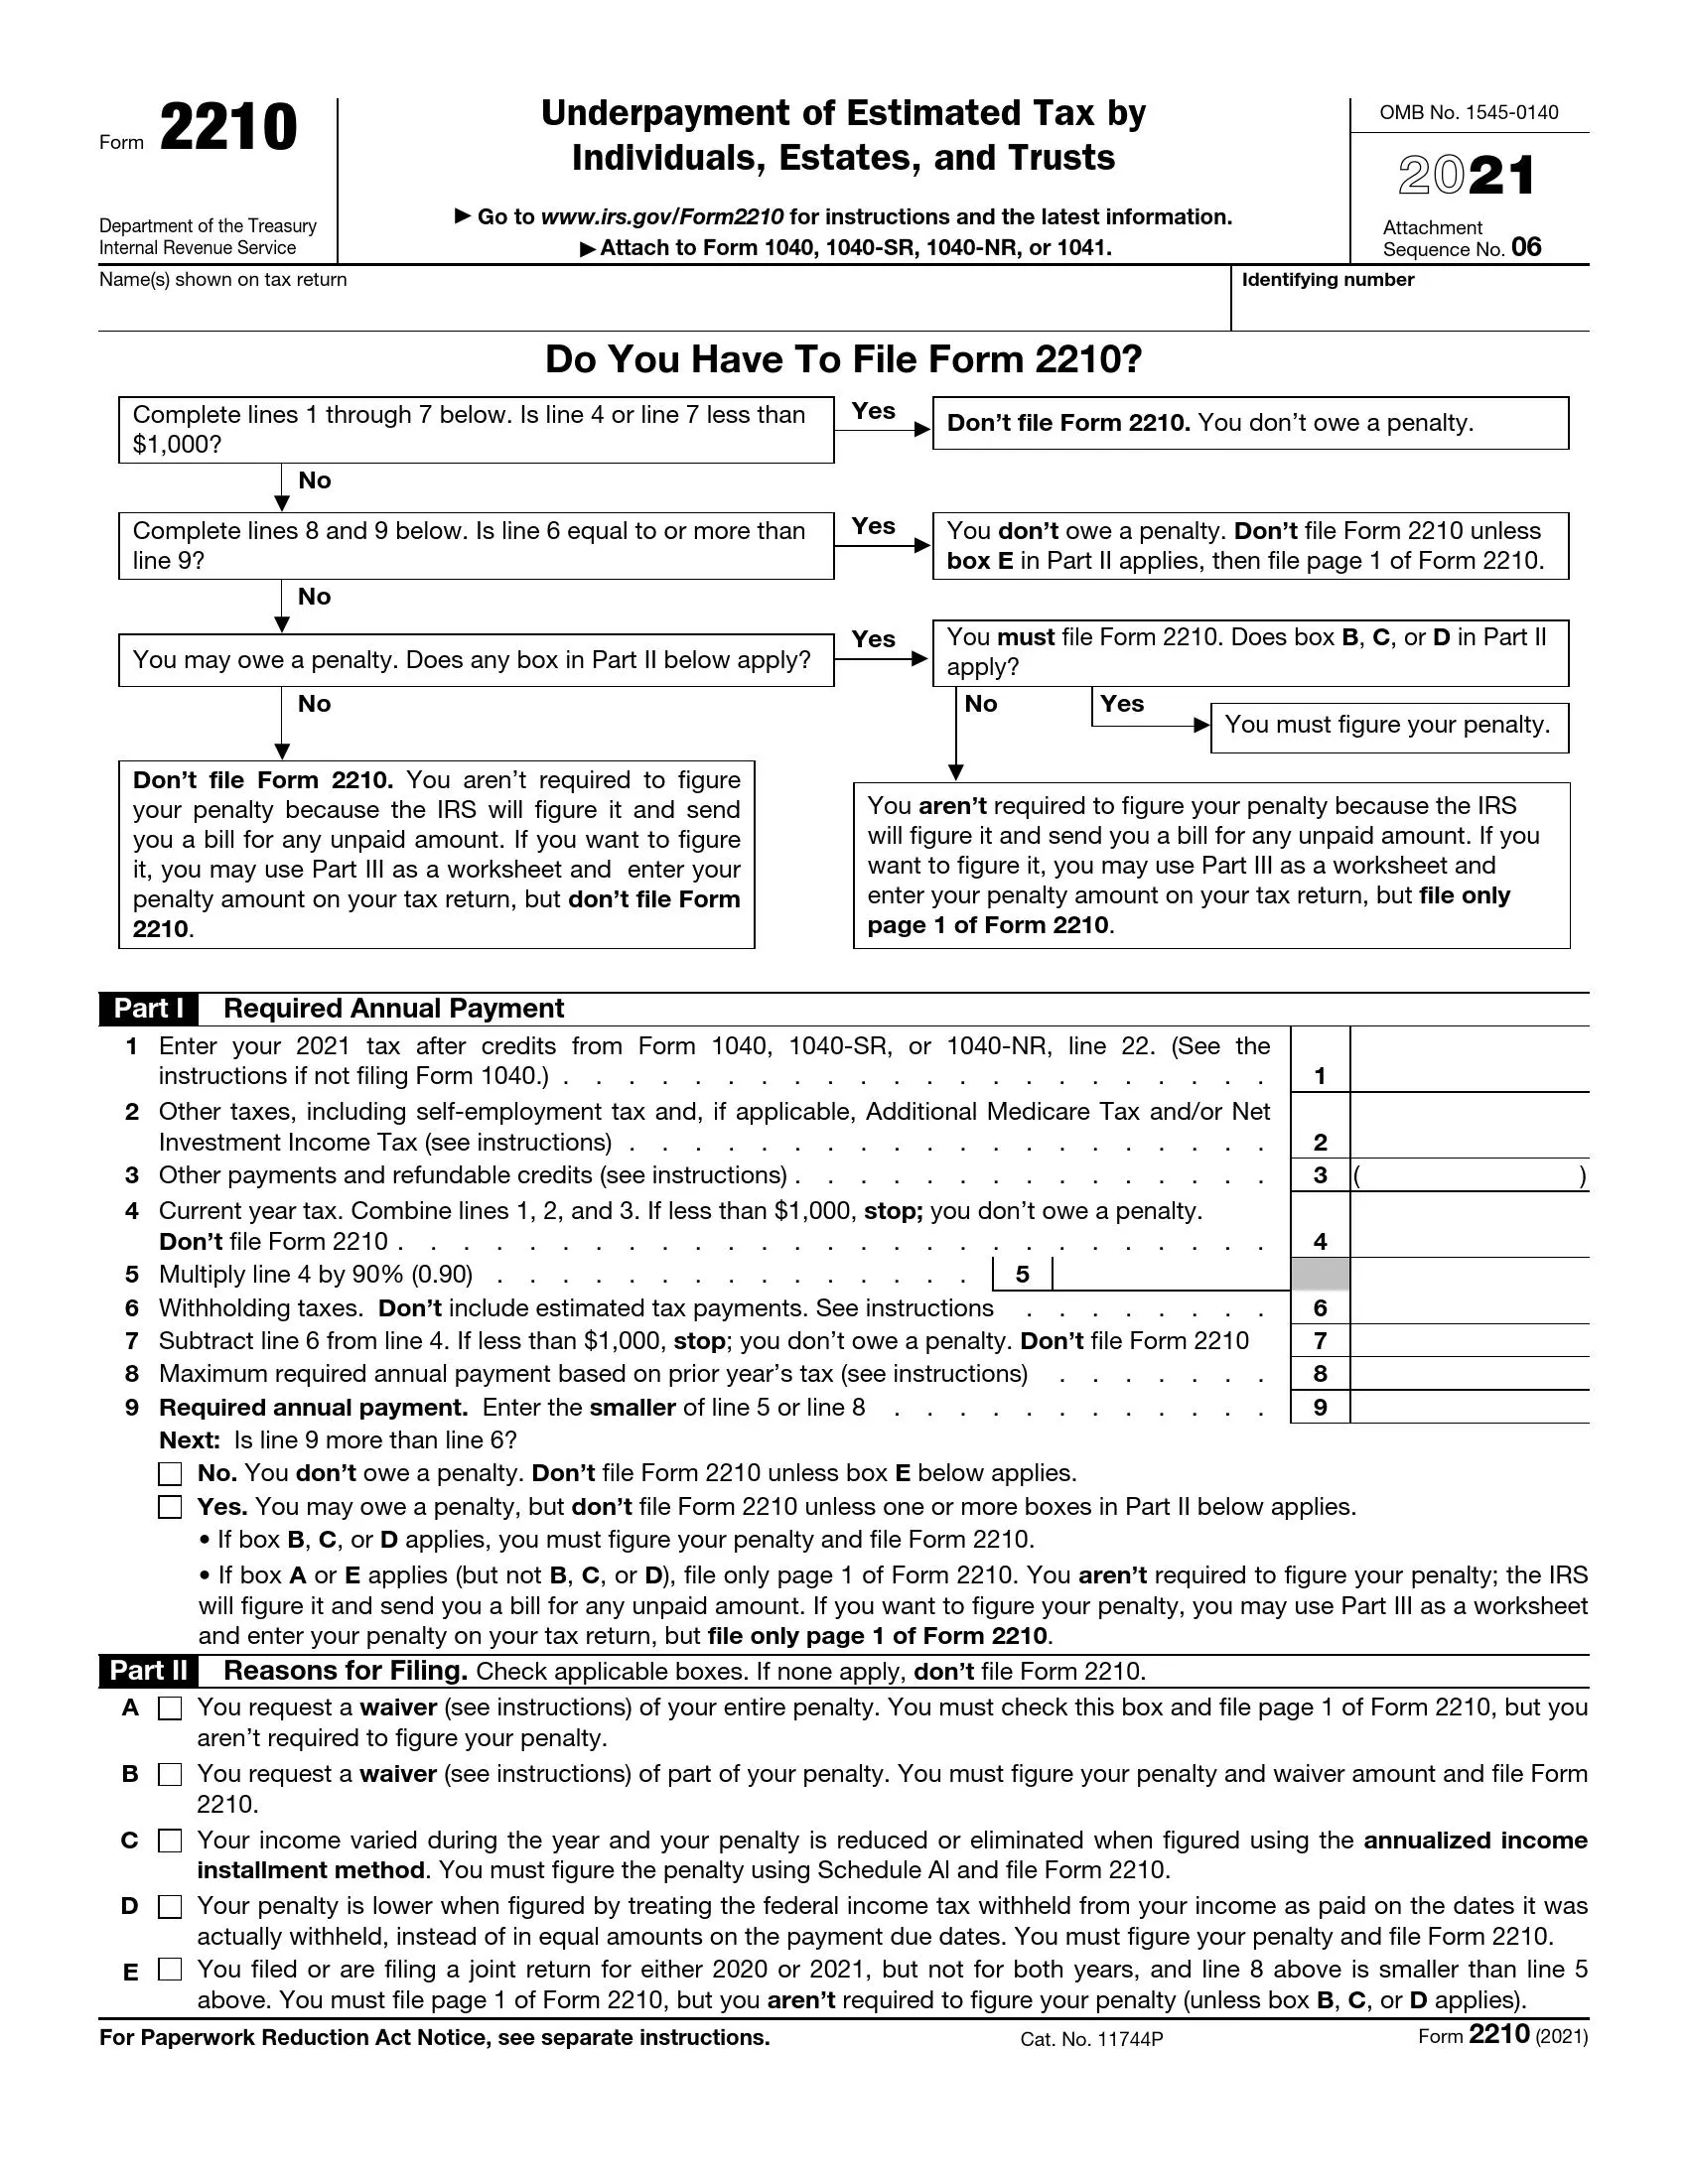 irs form 2210 2021 preview